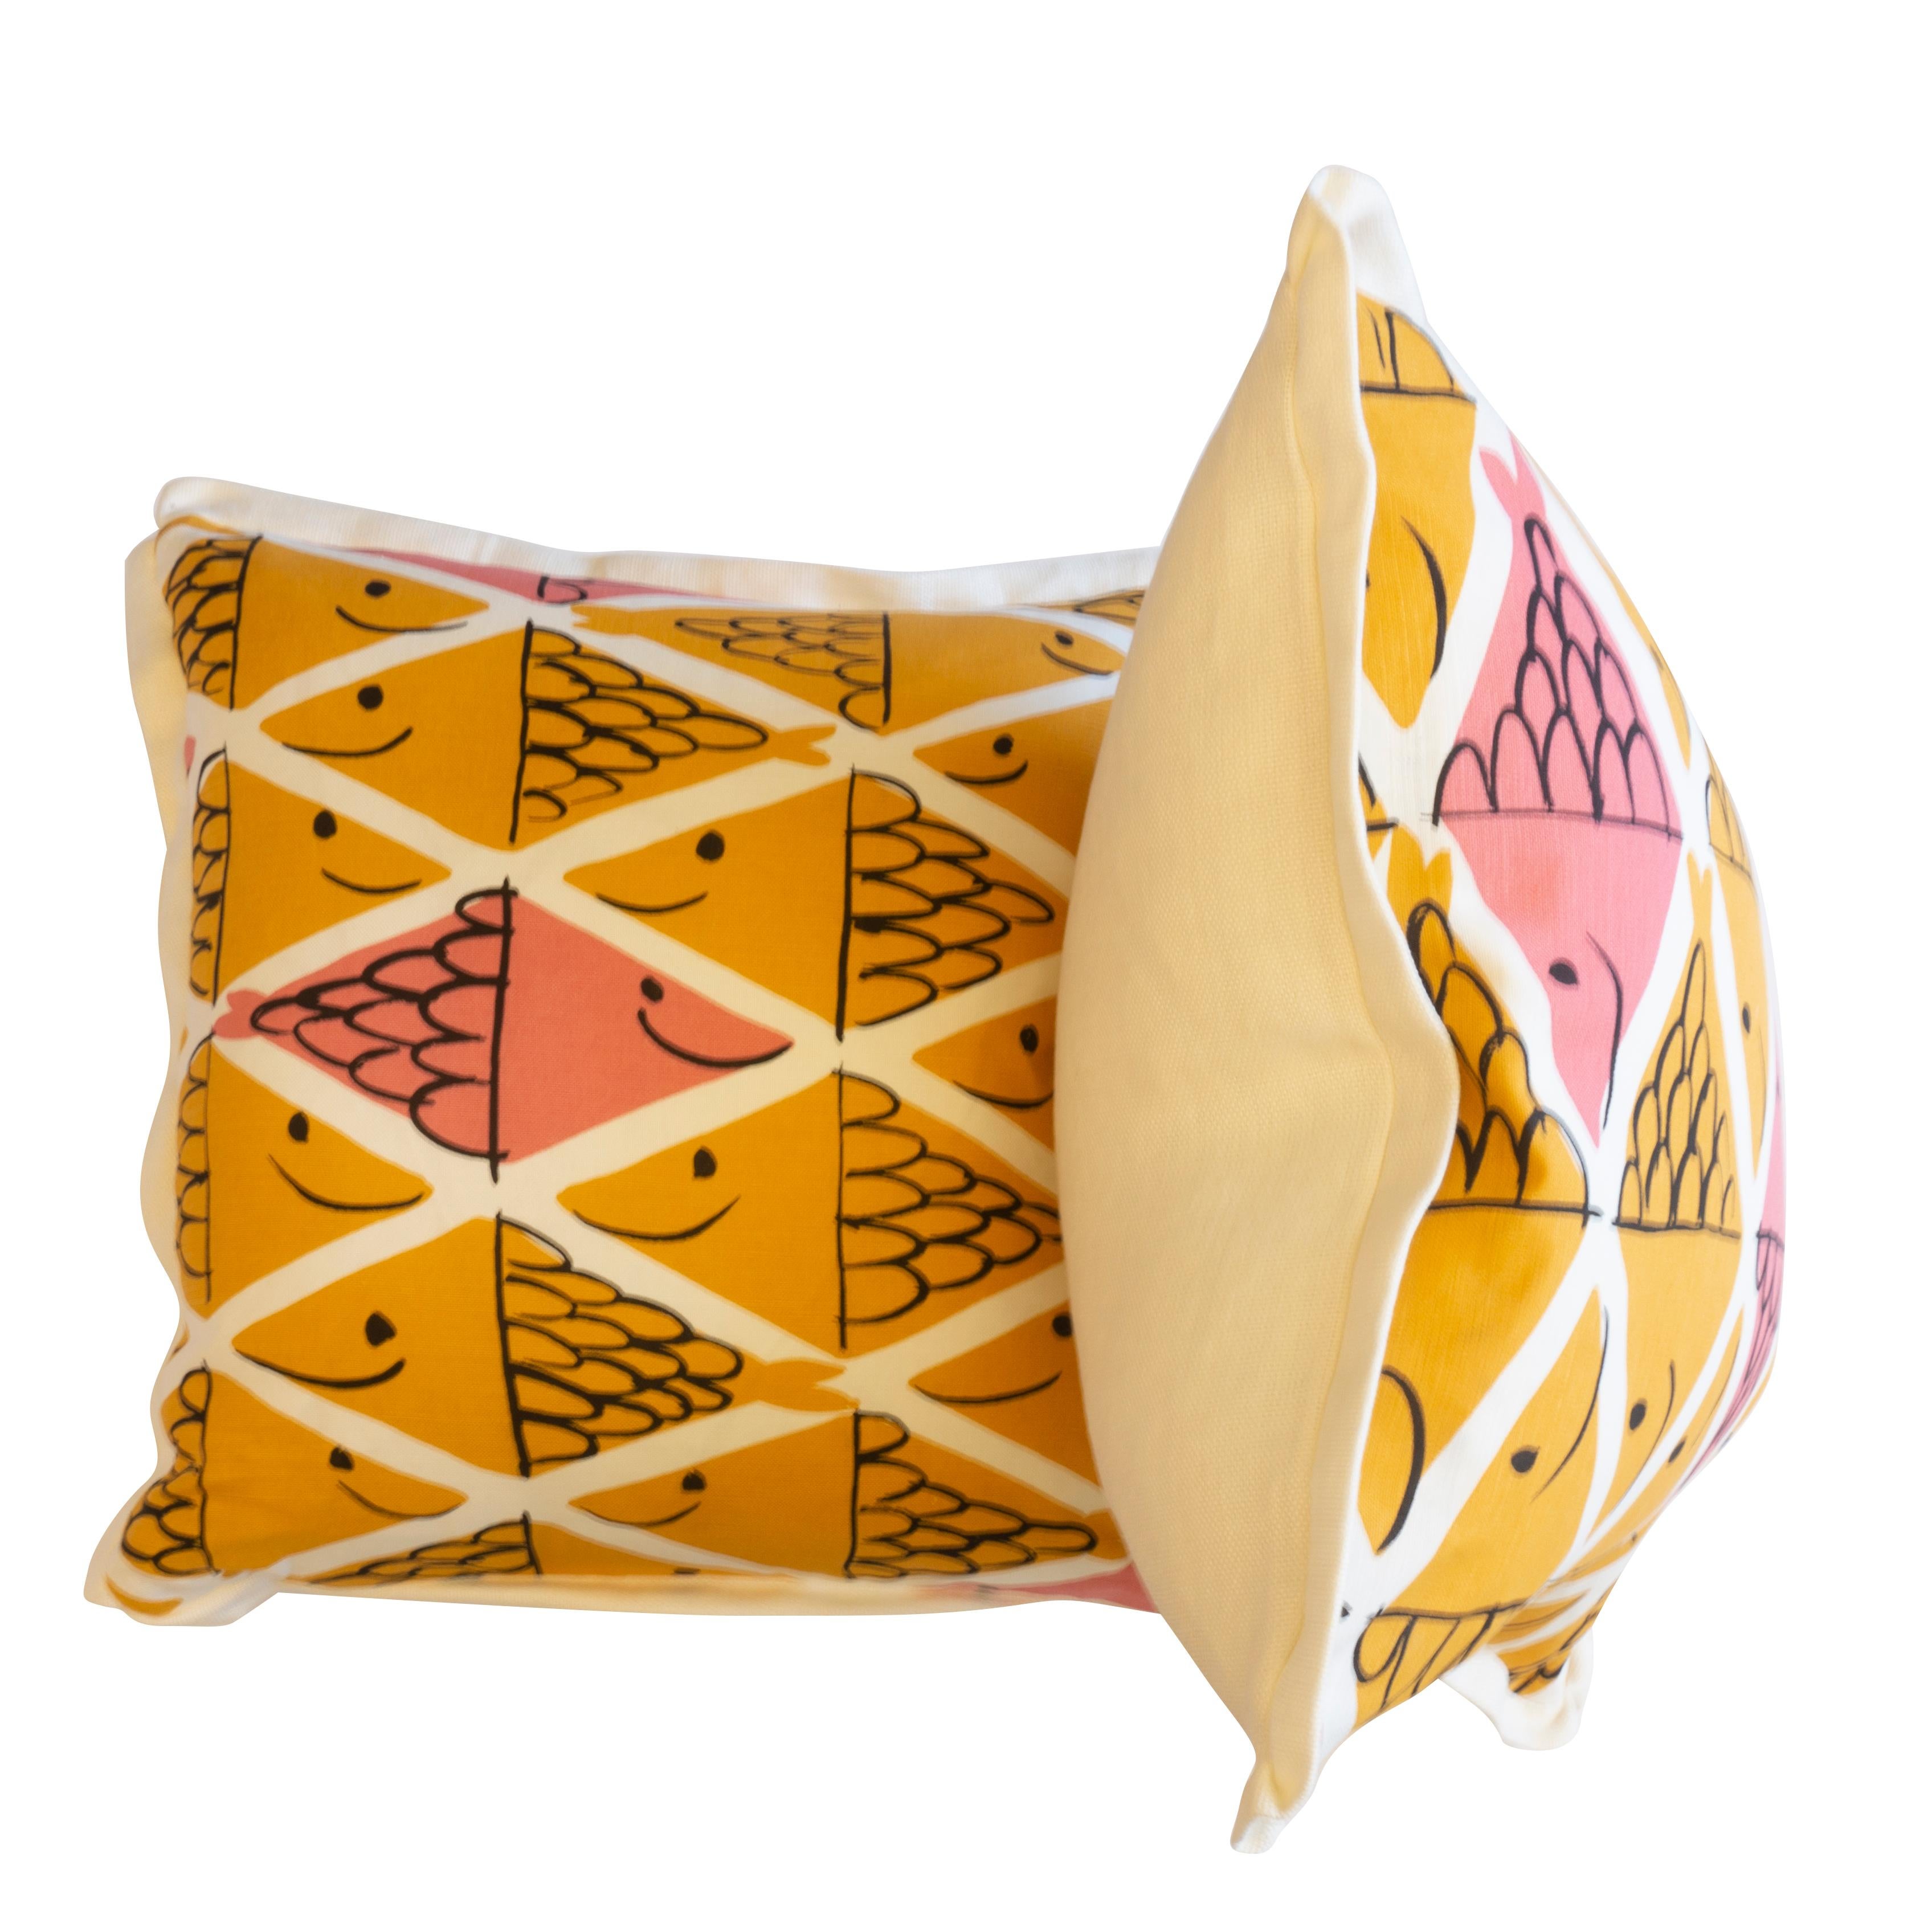 American Throw Pillows with Smiling School of Fish Pattern